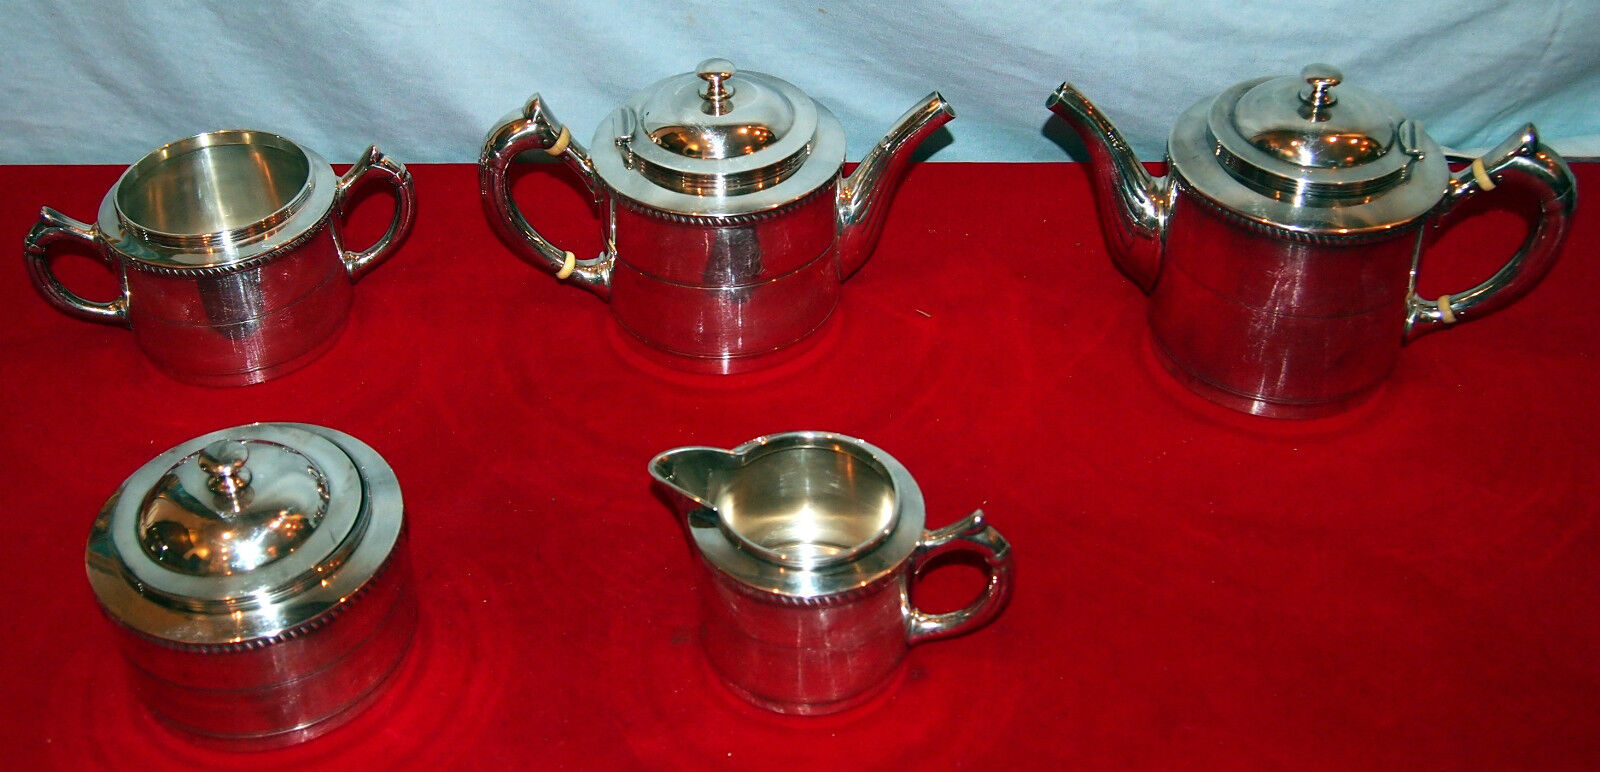 Tucson Mall REED & BARTON 5 PIECES TEA COFFEE ELEGANT SET Safety and trust PAT PLATE SILVER